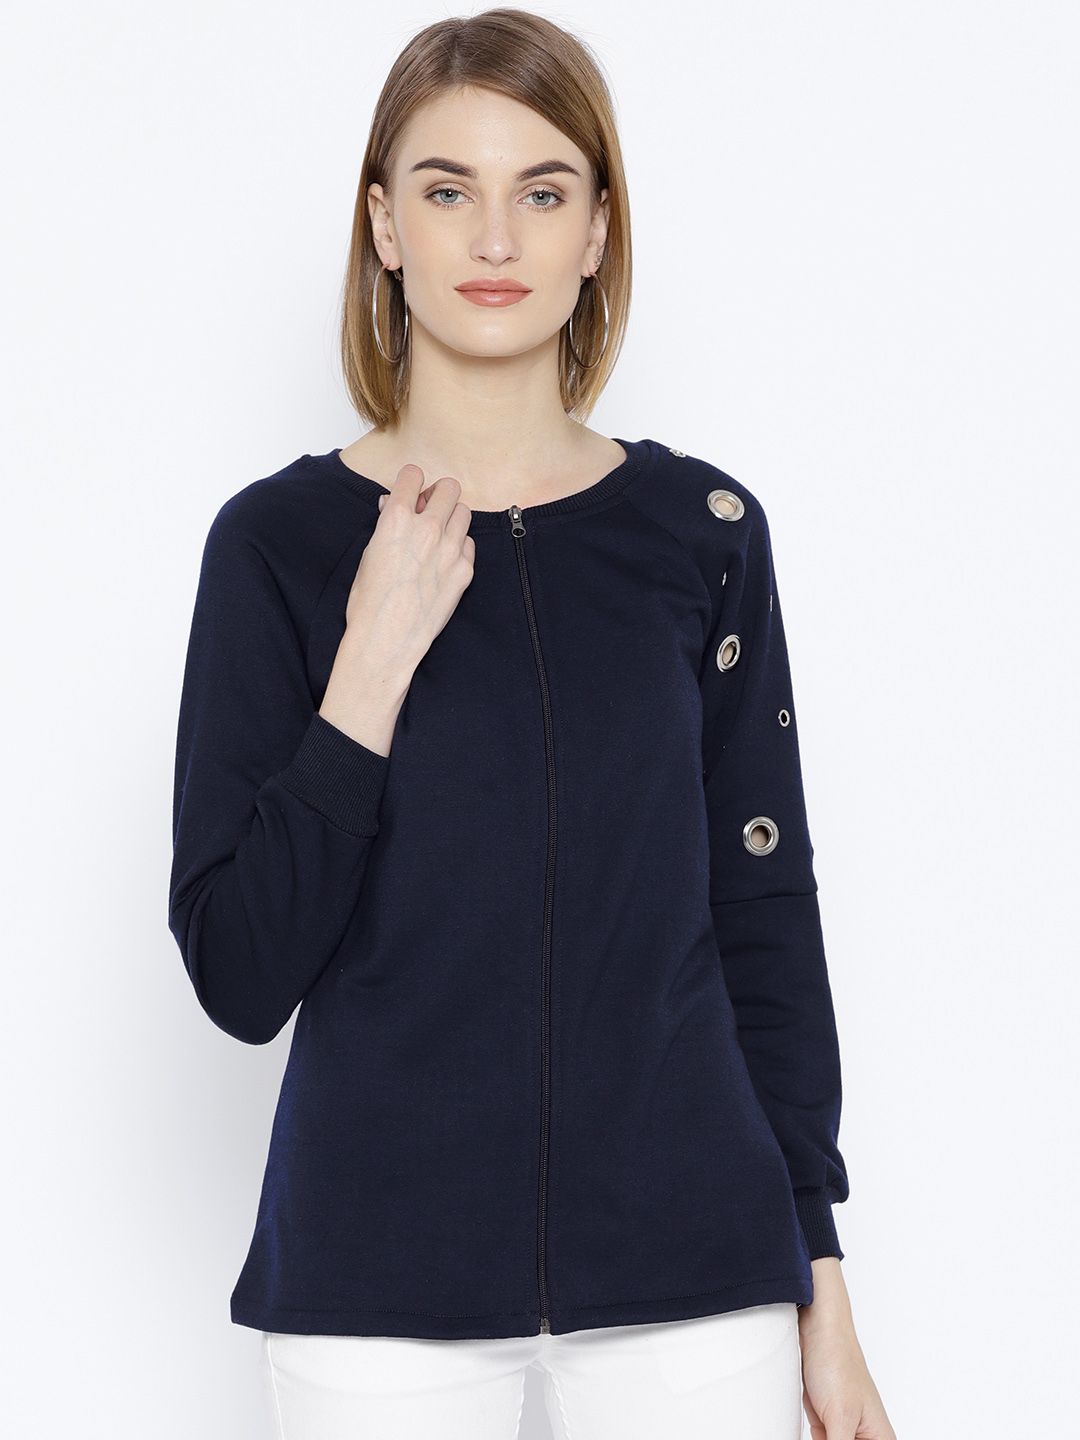 Belle Fille Women Navy Blue Solid Sweatshirt with Cut-Out Detail Price in India